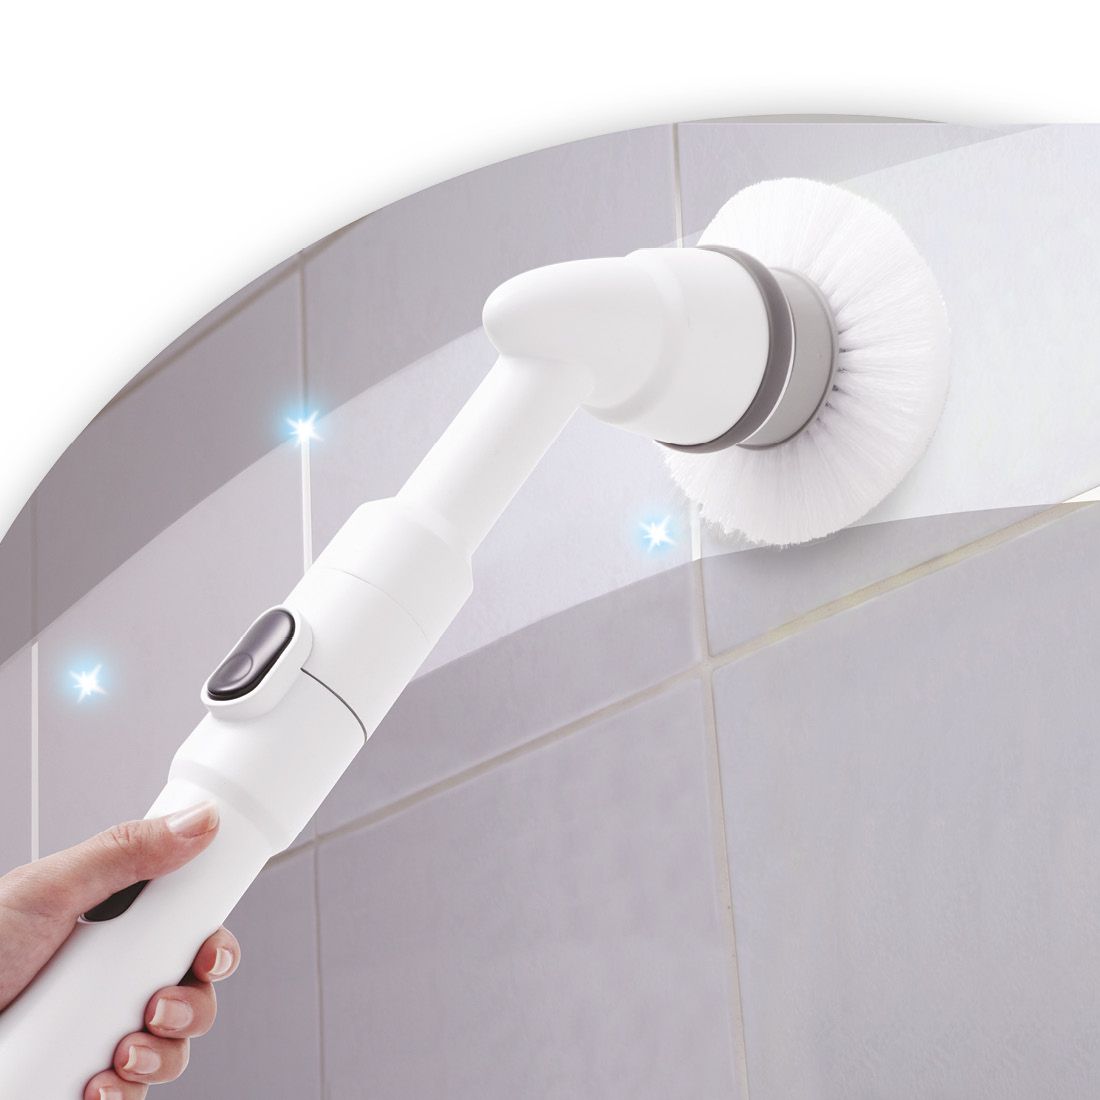  Turbo Scrub Lite – Cordless and Rechargeable High-Power Scrubber